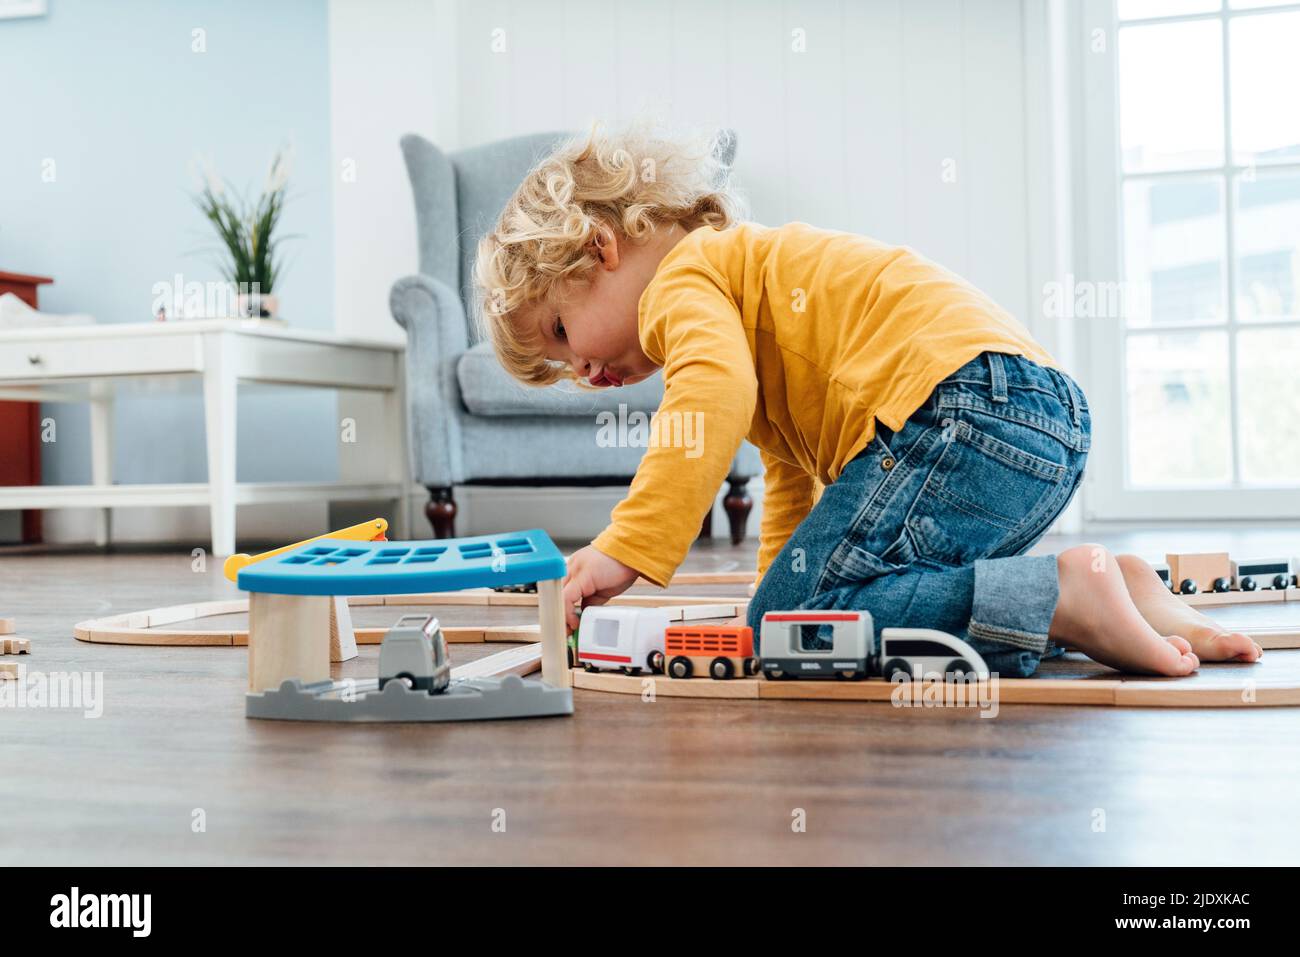 Blond boy playing with toy train set at home Stock Photo